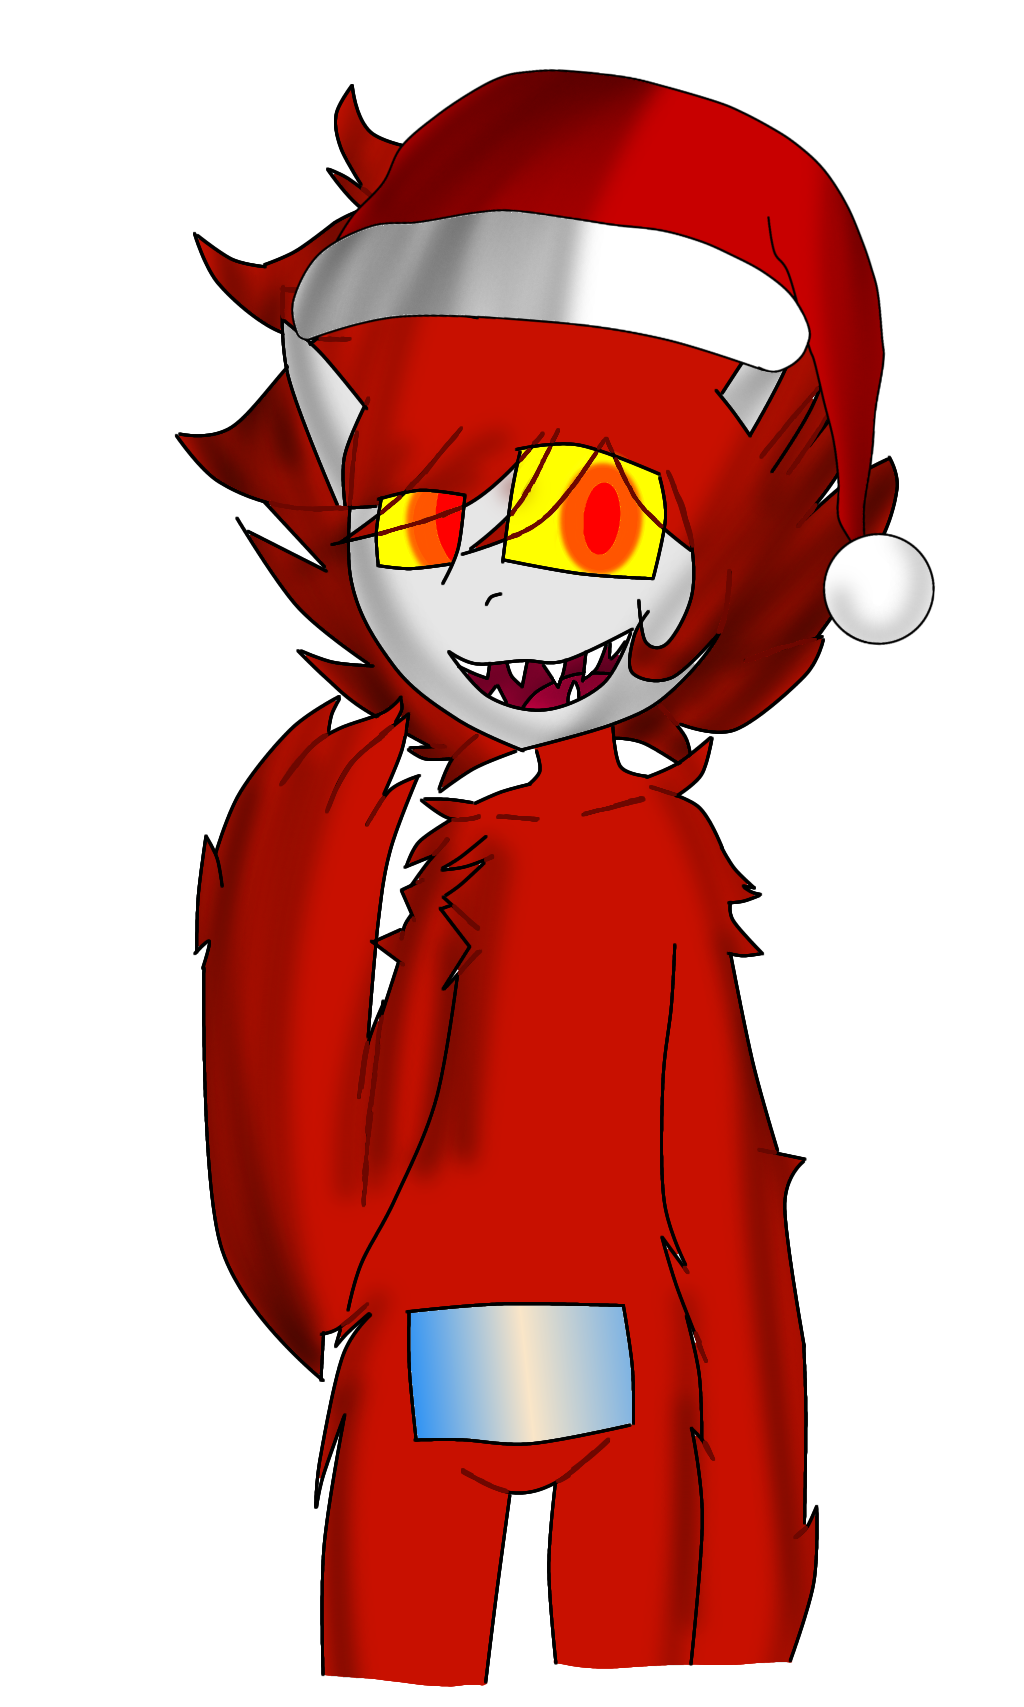 Tubby Claus infectado by delm38946 on DeviantArt